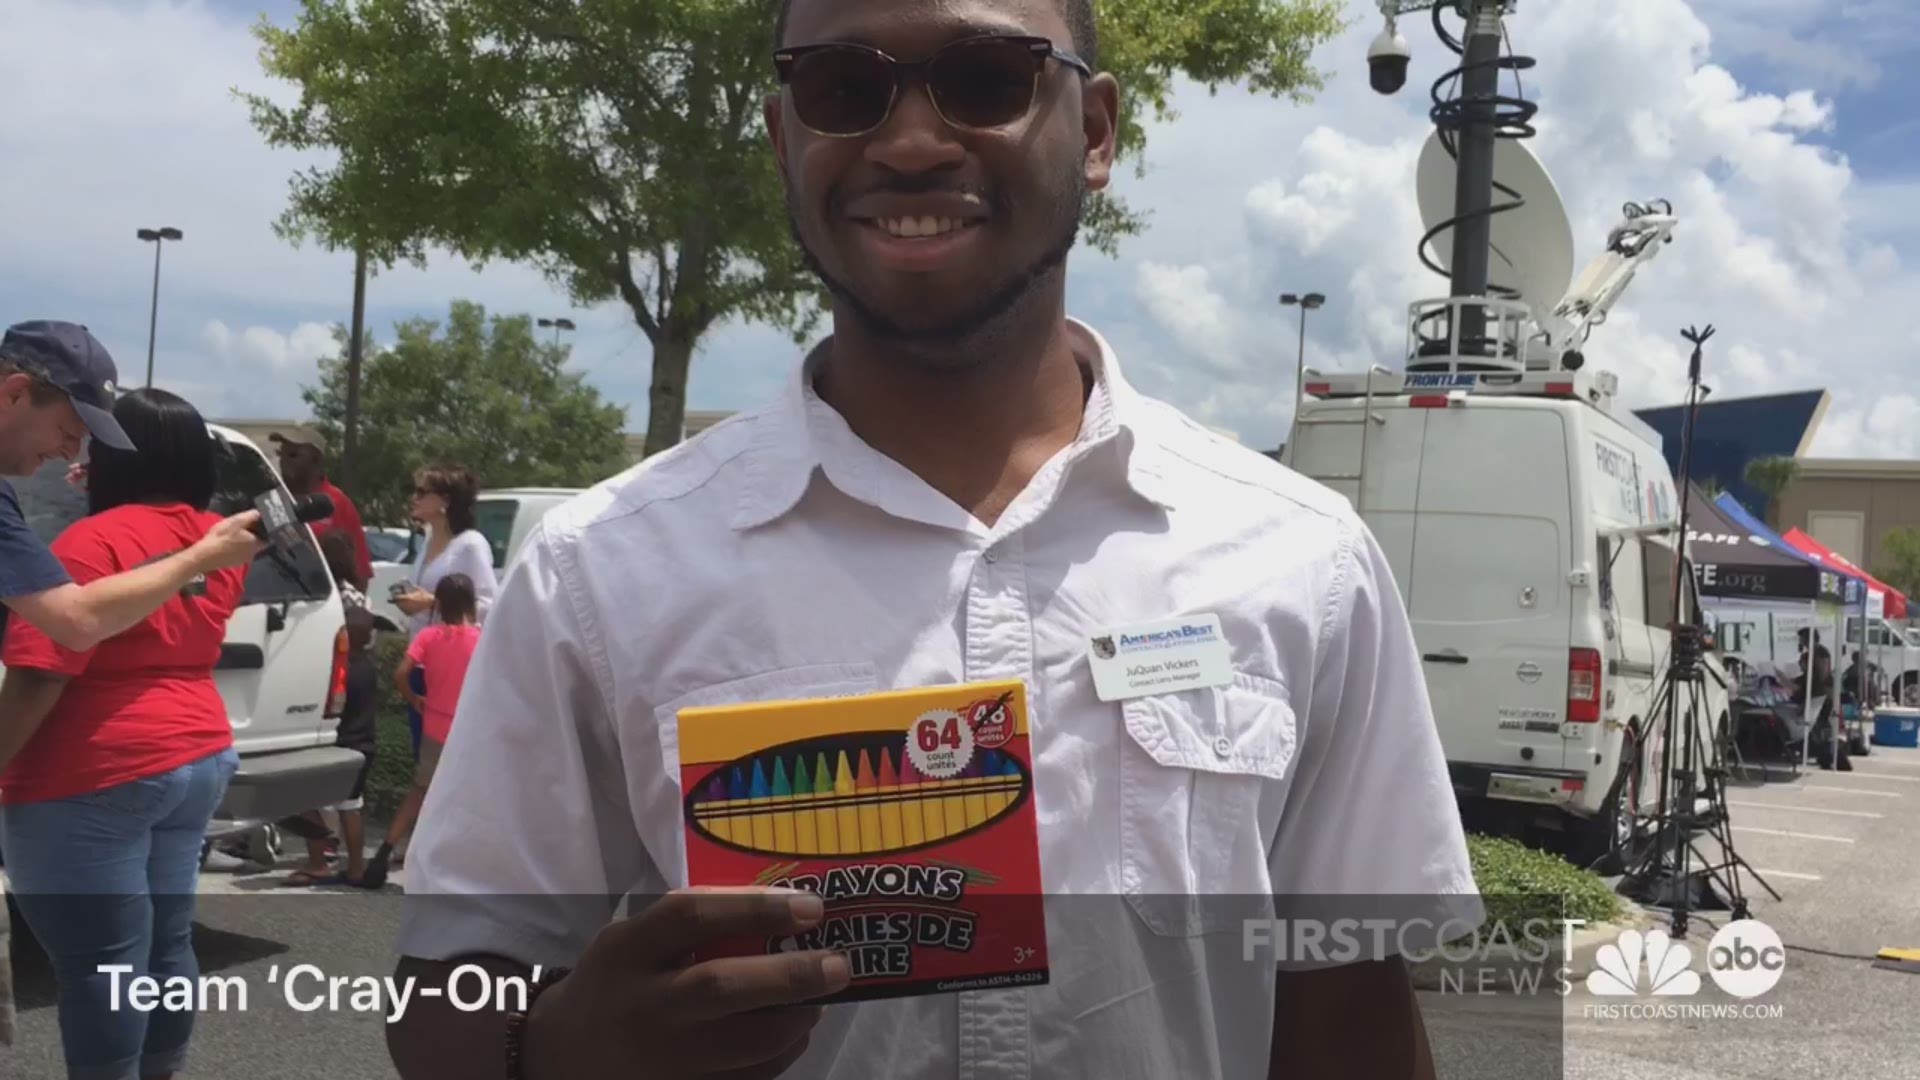 Team First Coast News had a blast stuffing buses with school supplies Friday, but one of the popular items sparked a little debate.